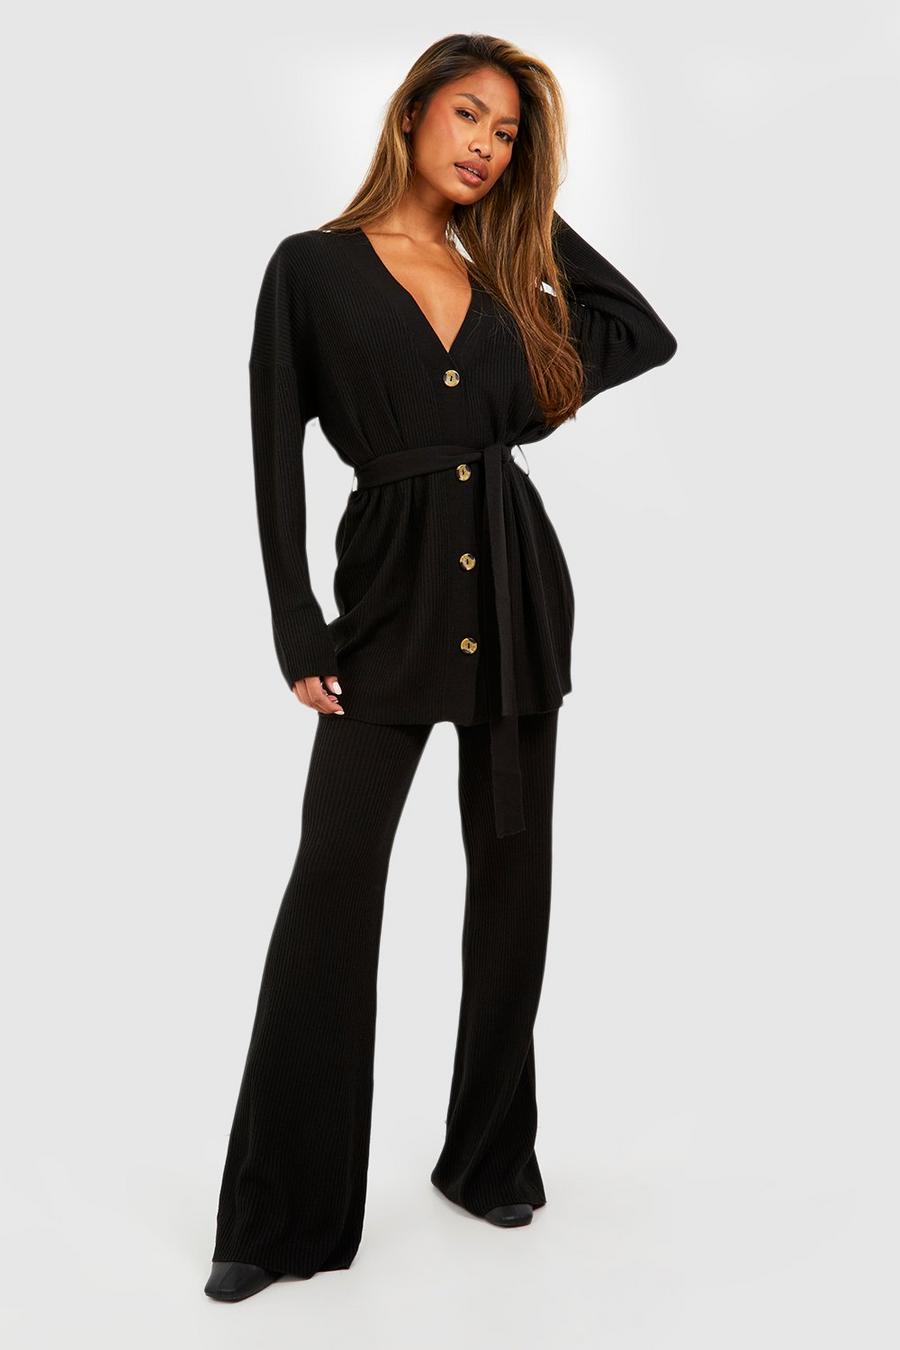 Black Knitted Cardigan & Wide Leg Pants Co-Ord